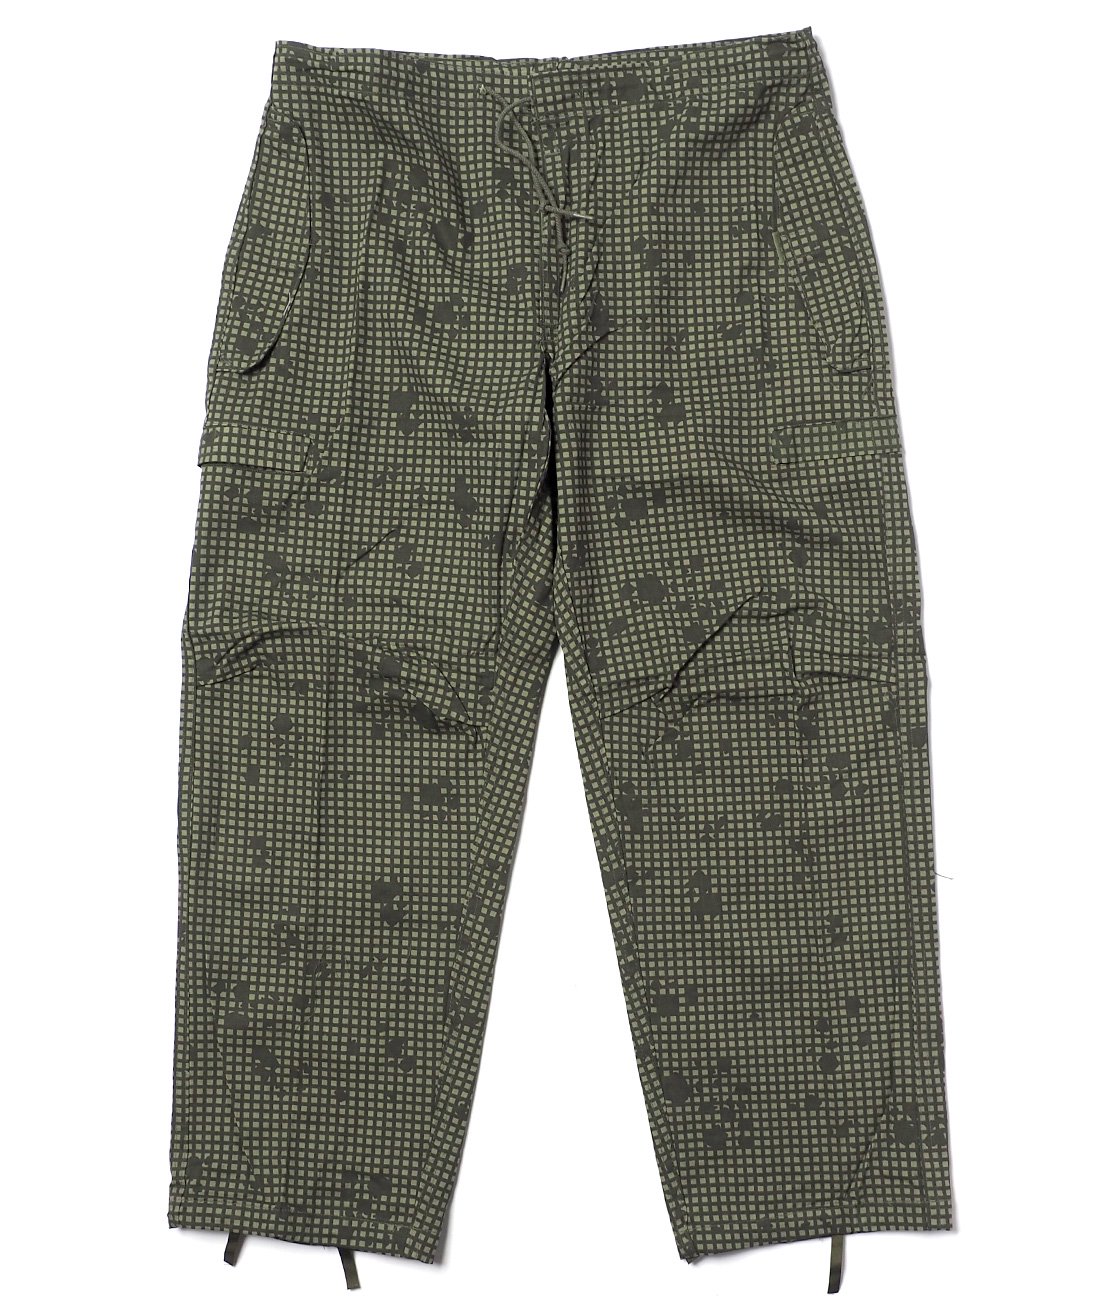 DEAD STOCK】80s US ARMY DESERT NIGHT CAMOUFLAGE TROUSERS 米軍 ...